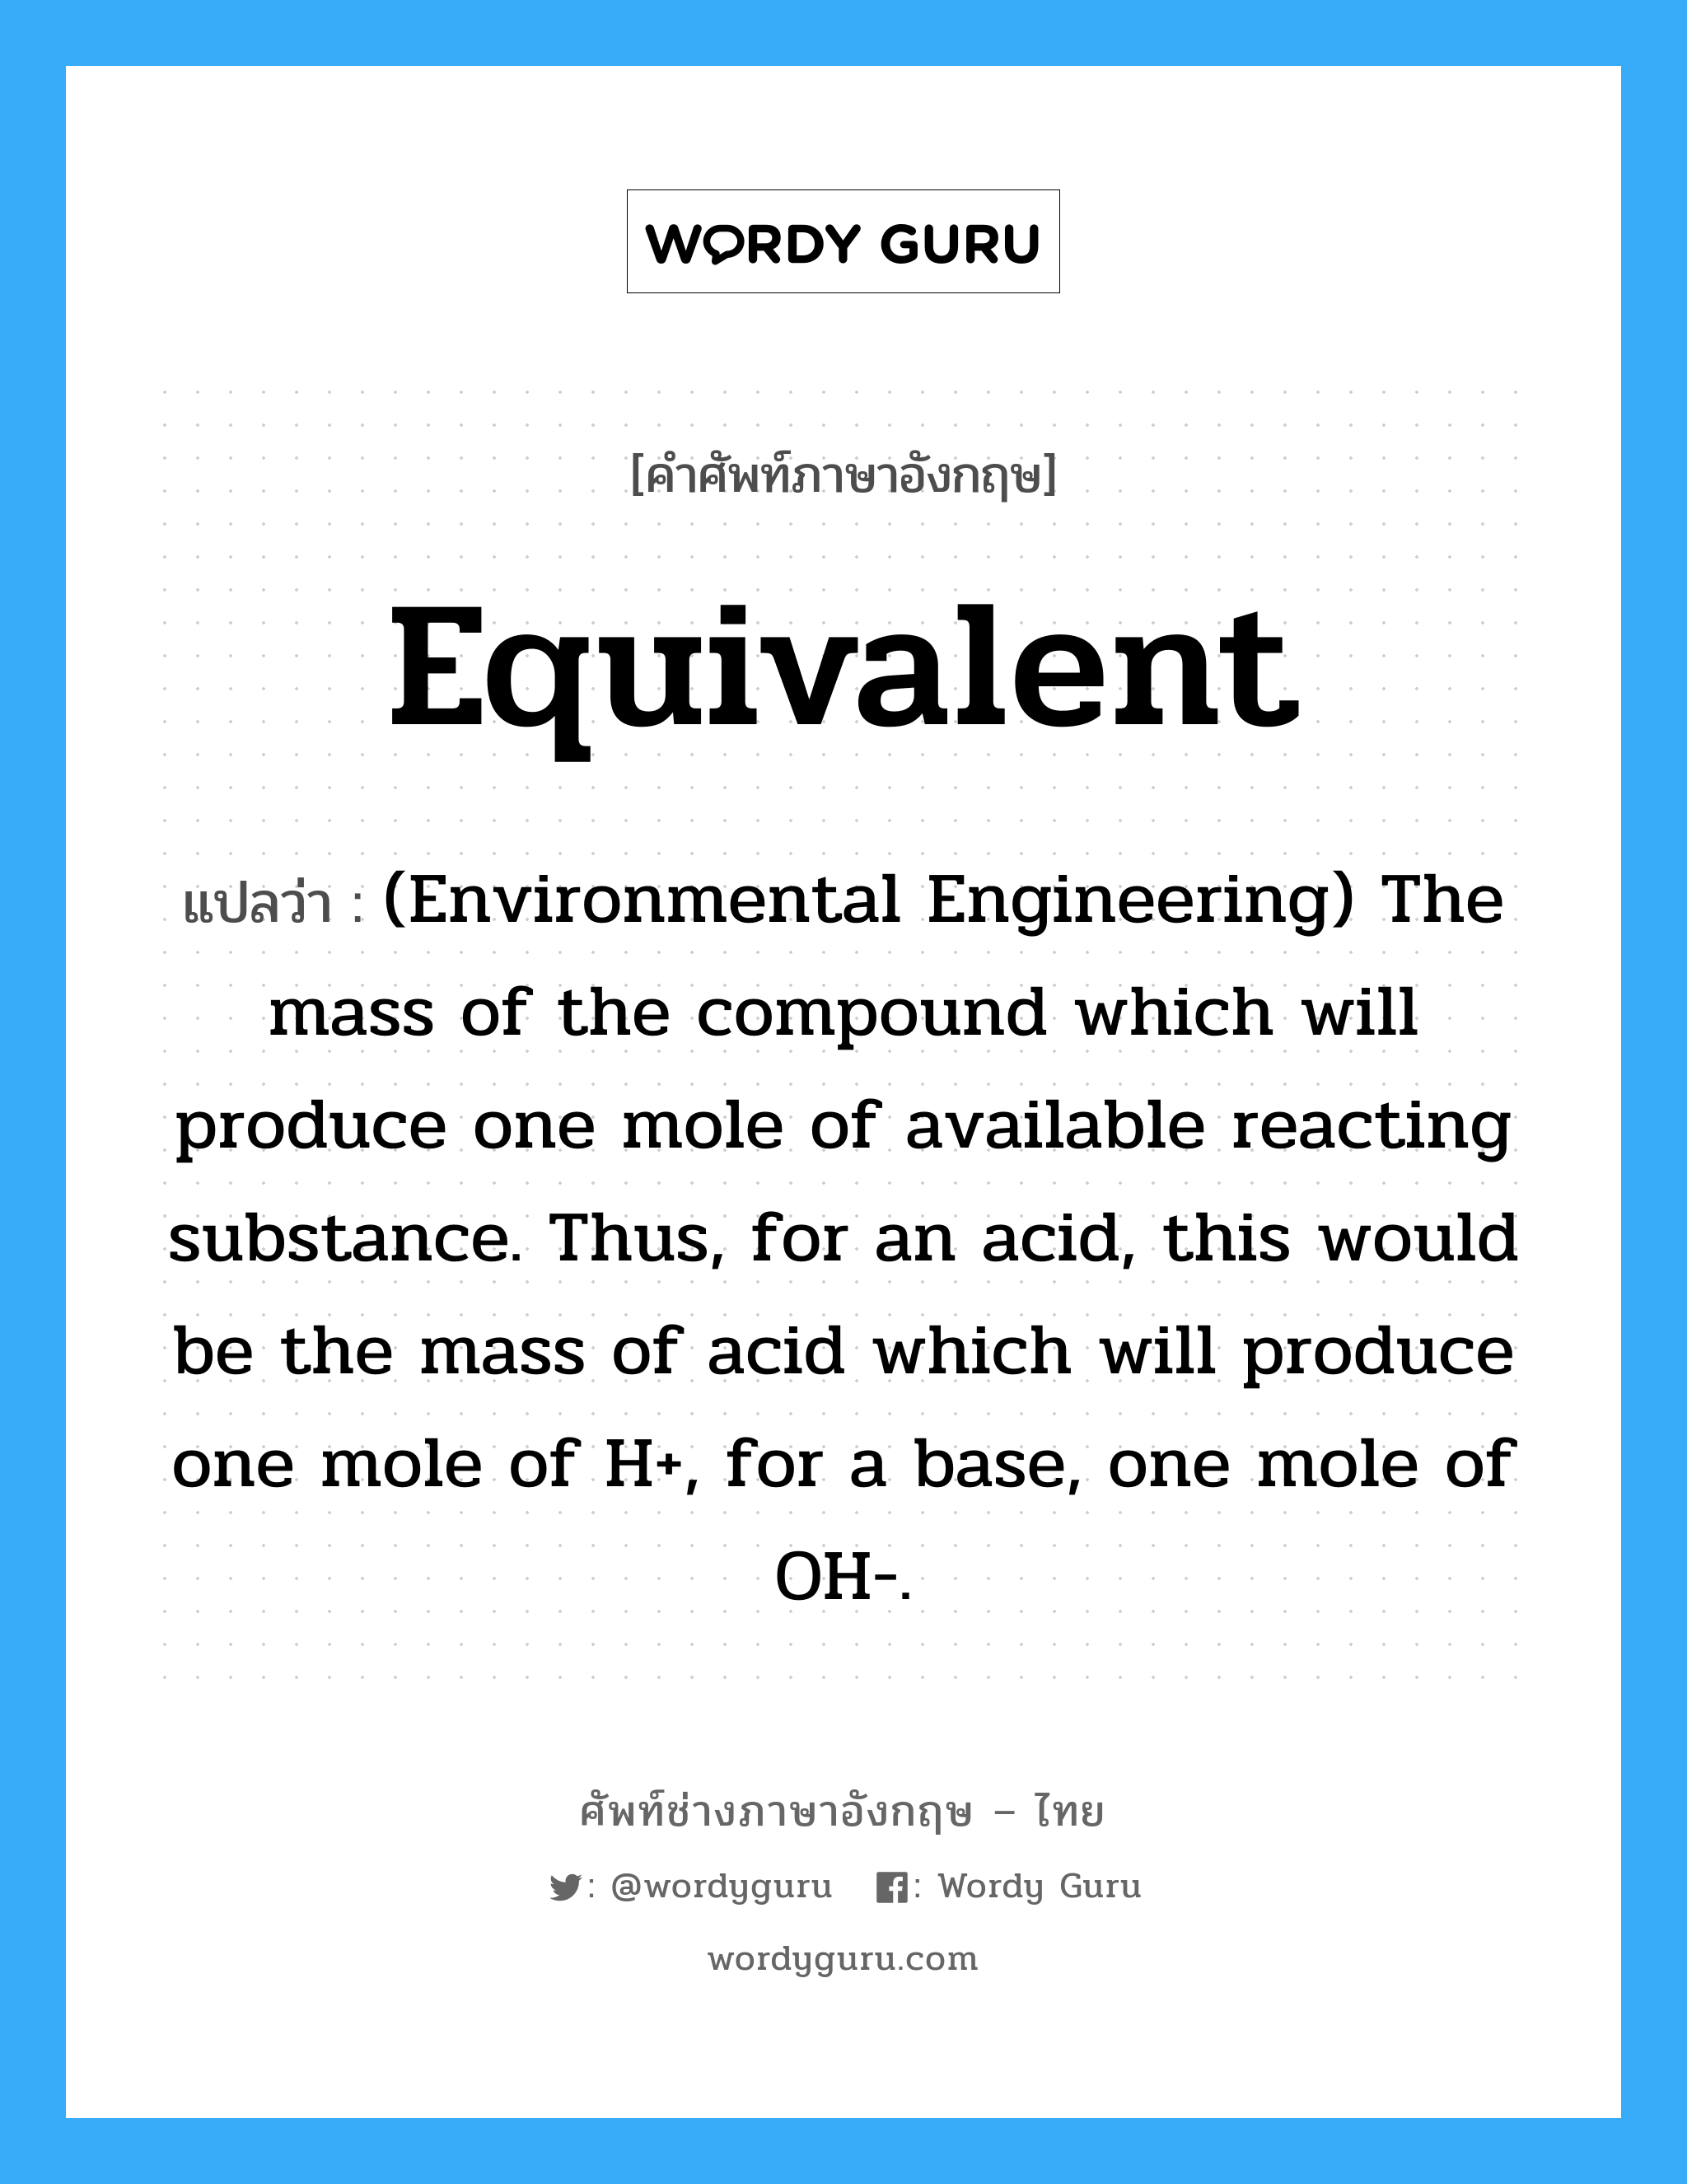 Equivalent แปลว่า?, คำศัพท์ช่างภาษาอังกฤษ - ไทย Equivalent คำศัพท์ภาษาอังกฤษ Equivalent แปลว่า (Environmental Engineering) The mass of the compound which will produce one mole of available reacting substance. Thus, for an acid, this would be the mass of acid which will produce one mole of H+, for a base, one mole of OH-.